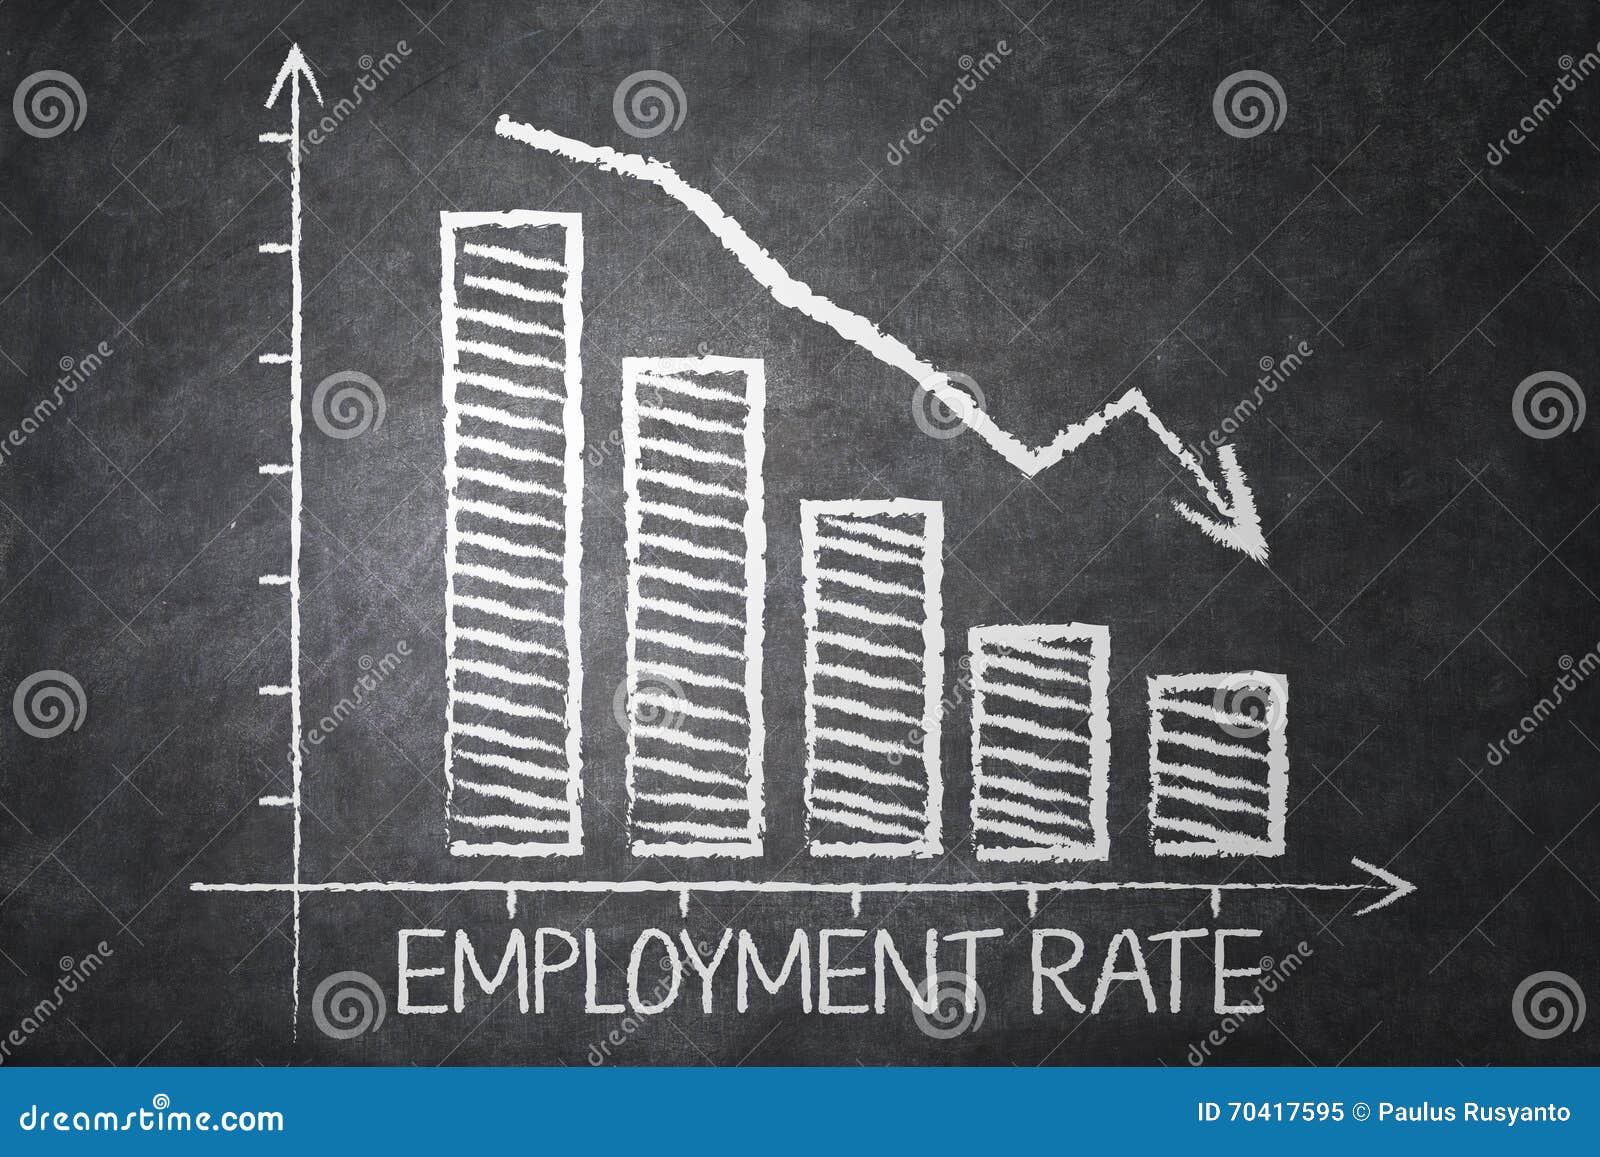 graph of declining employment rate